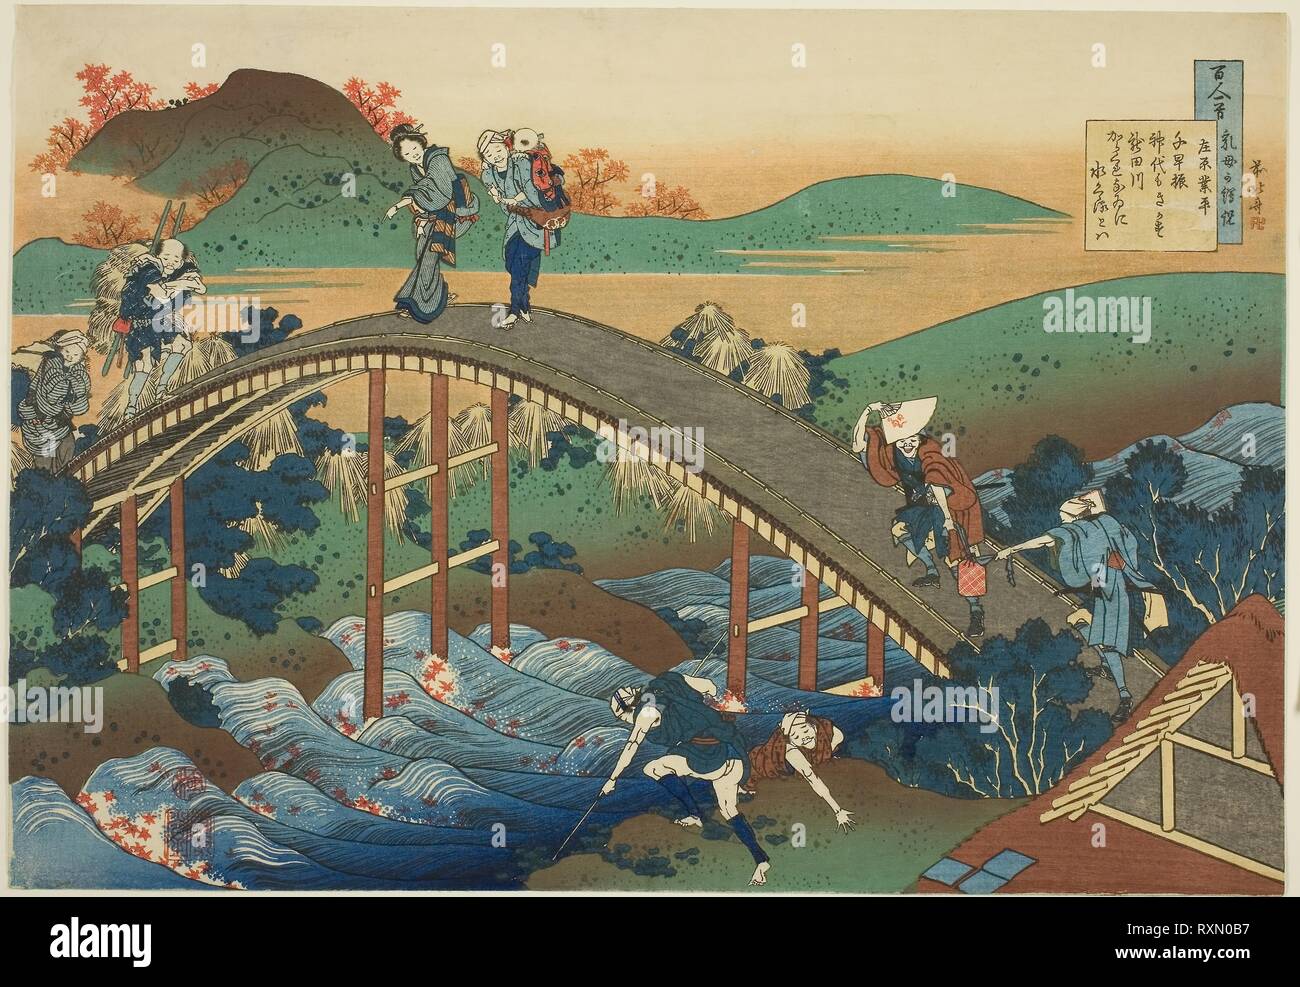 People Crossing an Arched Bridge (Ariwara no Narihira) from the series "One Hundred Poems as Explained by the Nurse (Hyakunin isshu uba ga etoki)". Katsushika Hokusai ?? ??; Japanese, 1760-1849. Date: 1830-1841. Dimensions: 26.1 x 37.7 cm (10 1/4 x 14 5/8 in.). Color woodblock print, oban. Origin: Japan. Museum: The Chicago Art Institute. Stock Photo